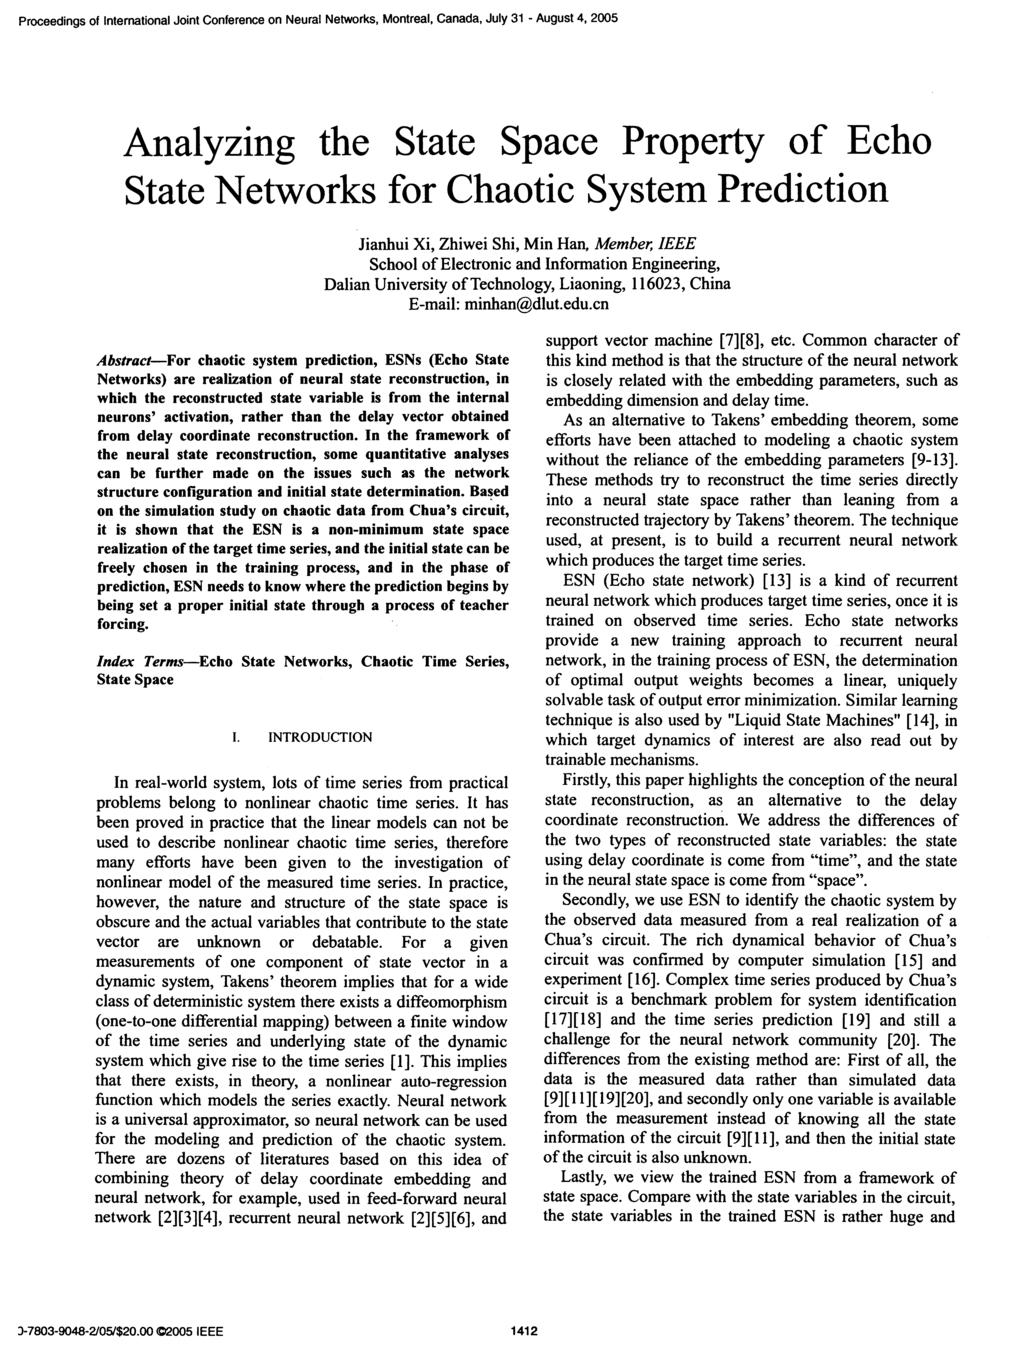 Proceedings of International Joint Conference on Neural Networks, Montreal, Canada, July 31 August 4, 25 Analyzing the State Space Property of Echo State Networks for Chaotic System Prediction